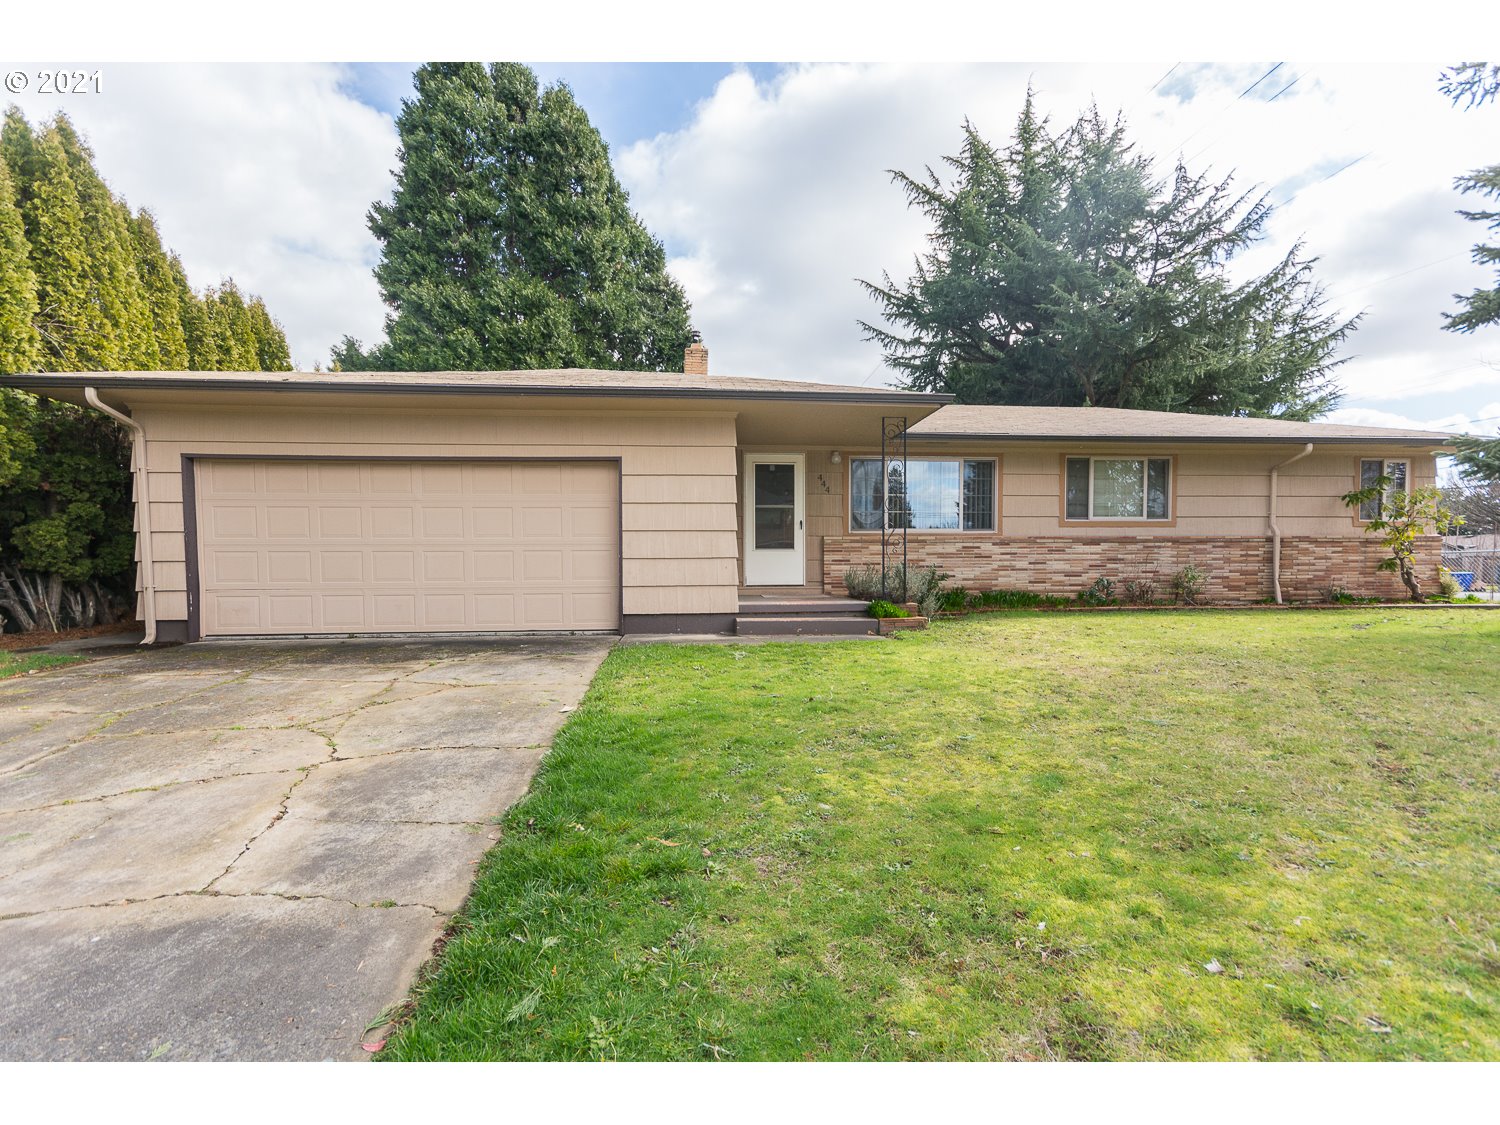 444 SE 153RD AVE (1 of 26)